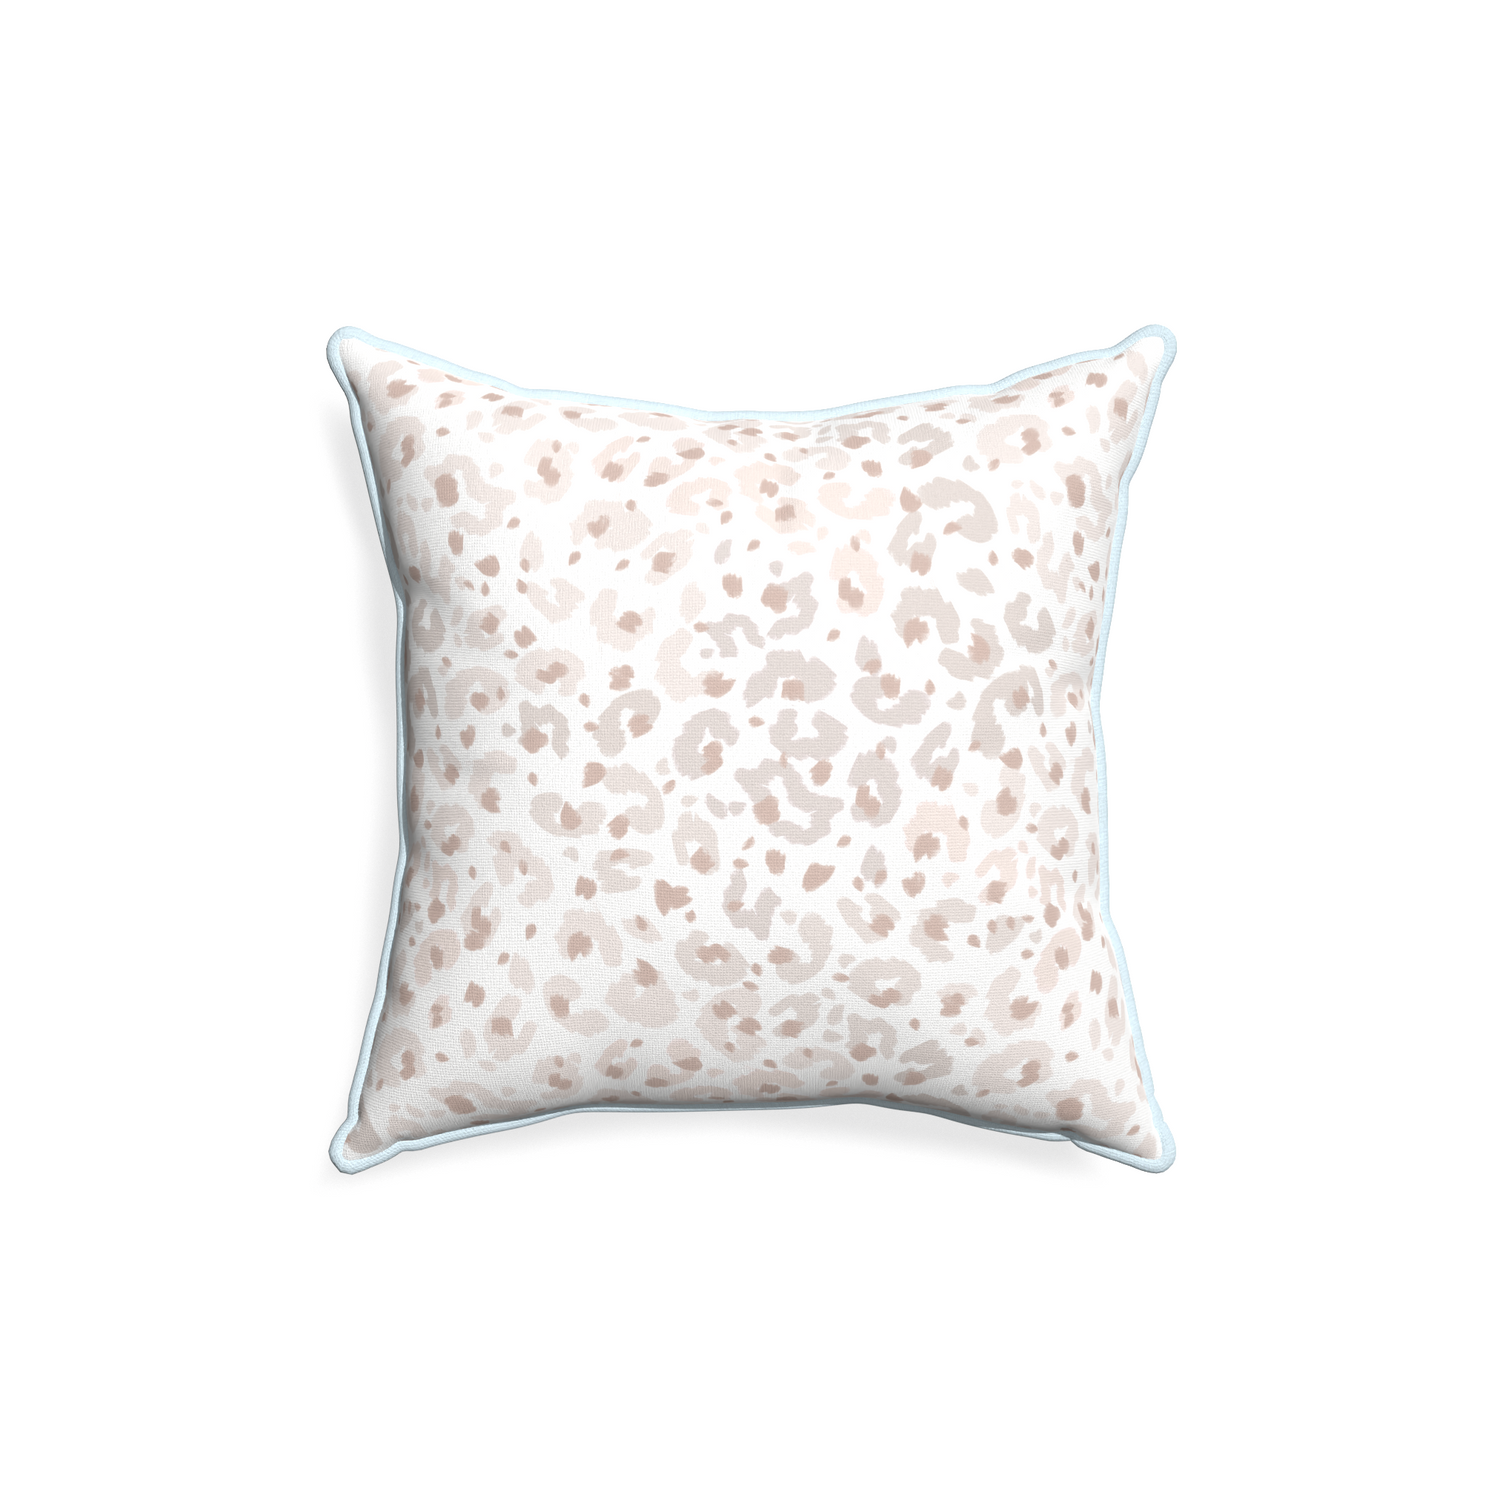 18-square rosie custom beige animal printpillow with powder piping on white background